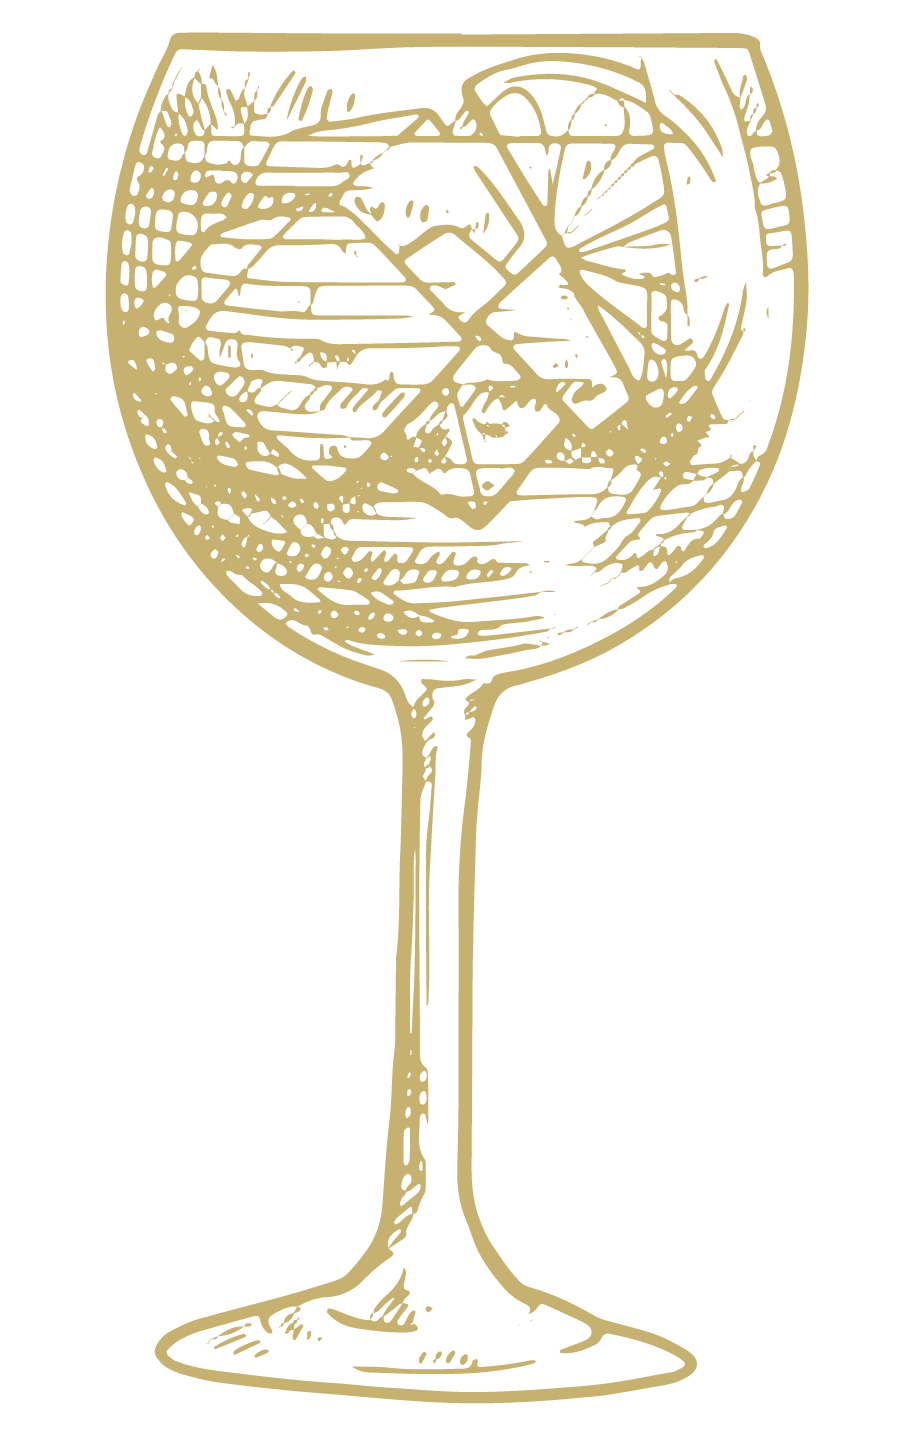 A drawing of a wine glass with a slice of lemon in it.